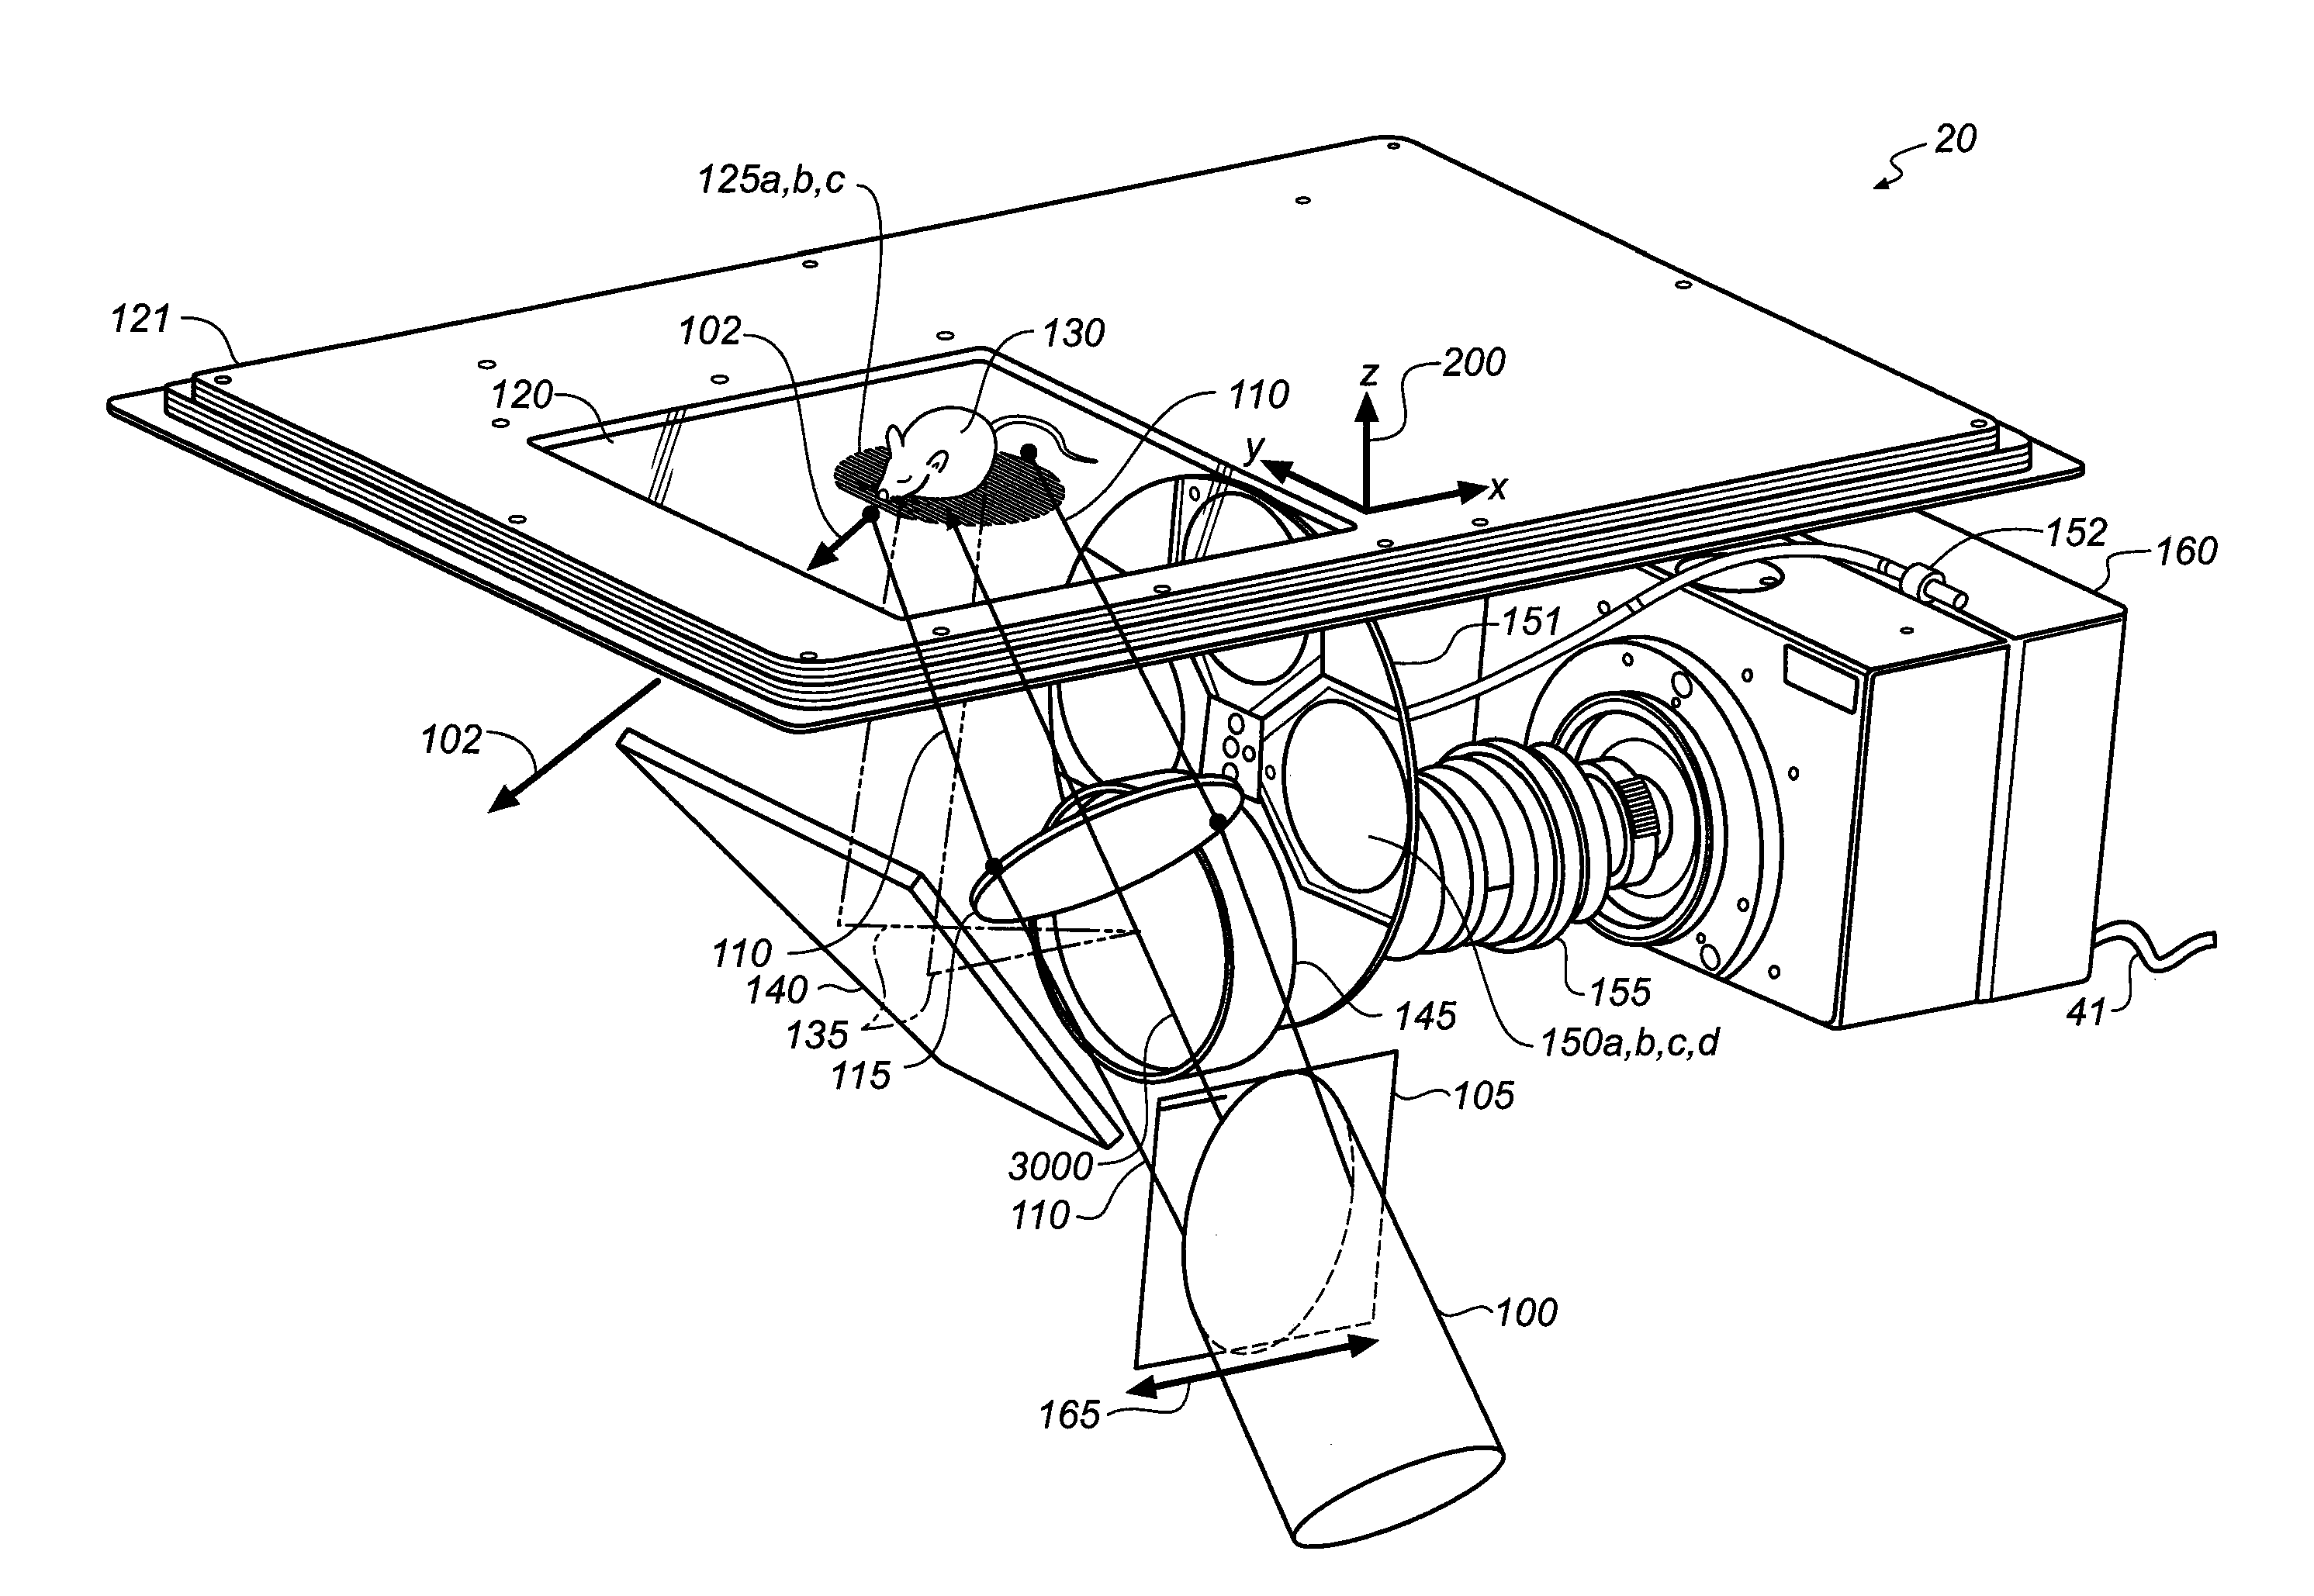 Apparatus and method for fluorescence imaging and tomography using spatially structured illumination